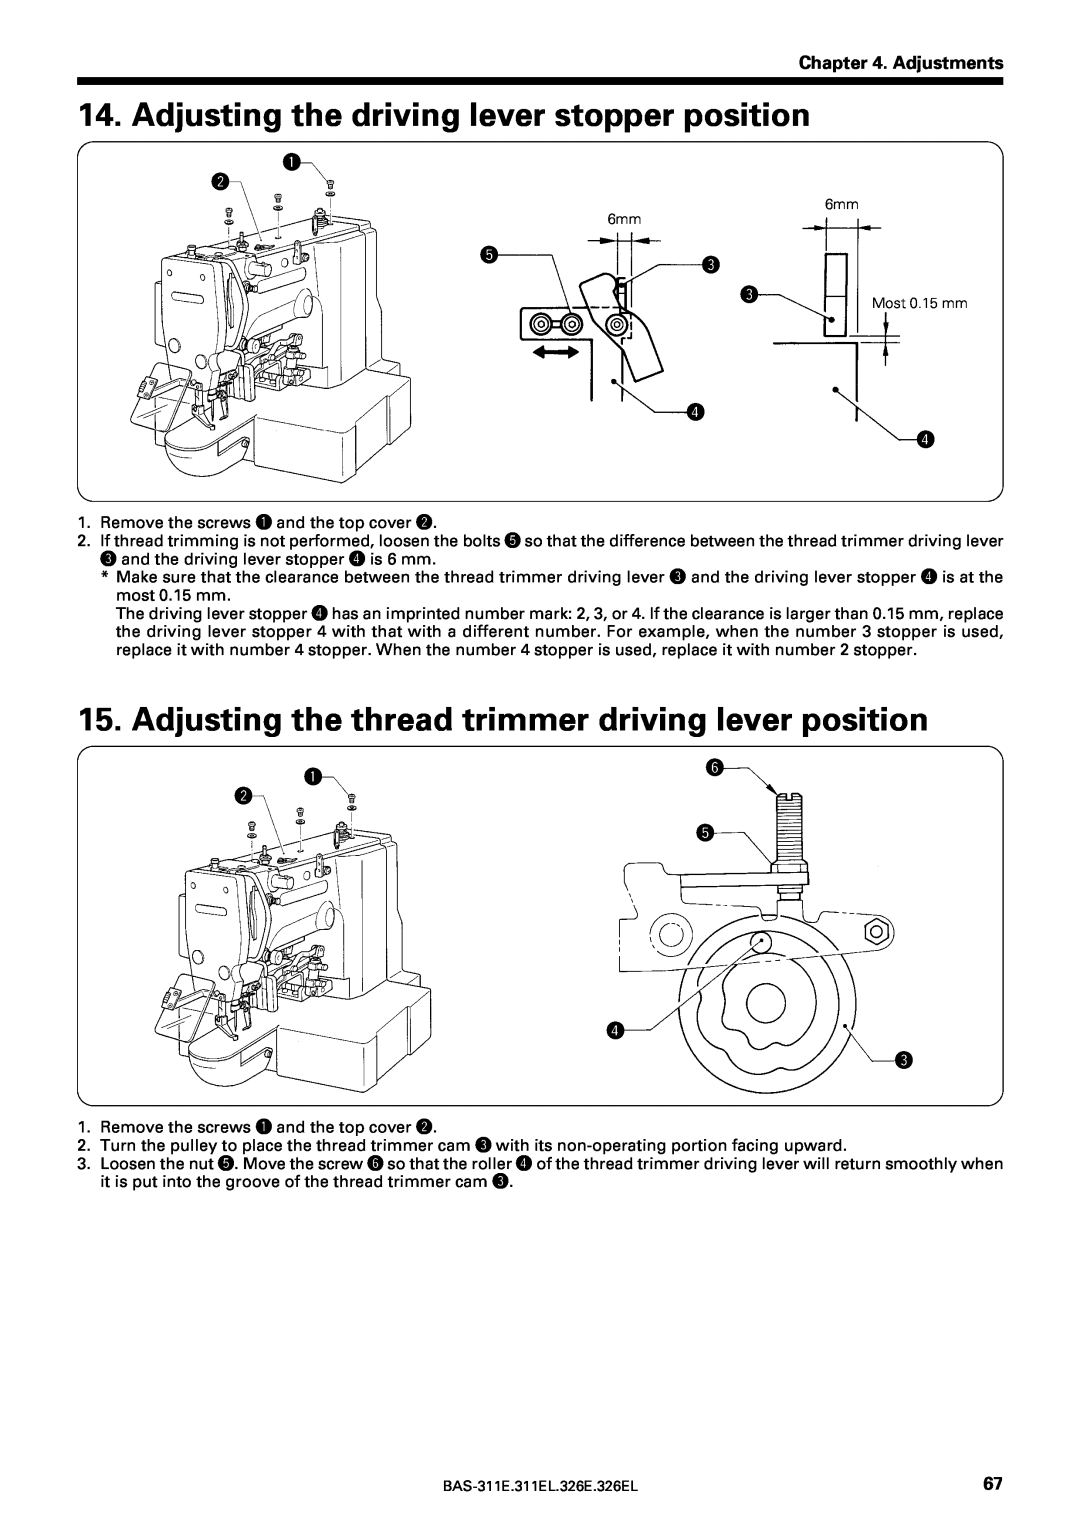 Brother BAS-311E Adjusting the driving lever stopper position, Adjusting the thread trimmer driving lever position 